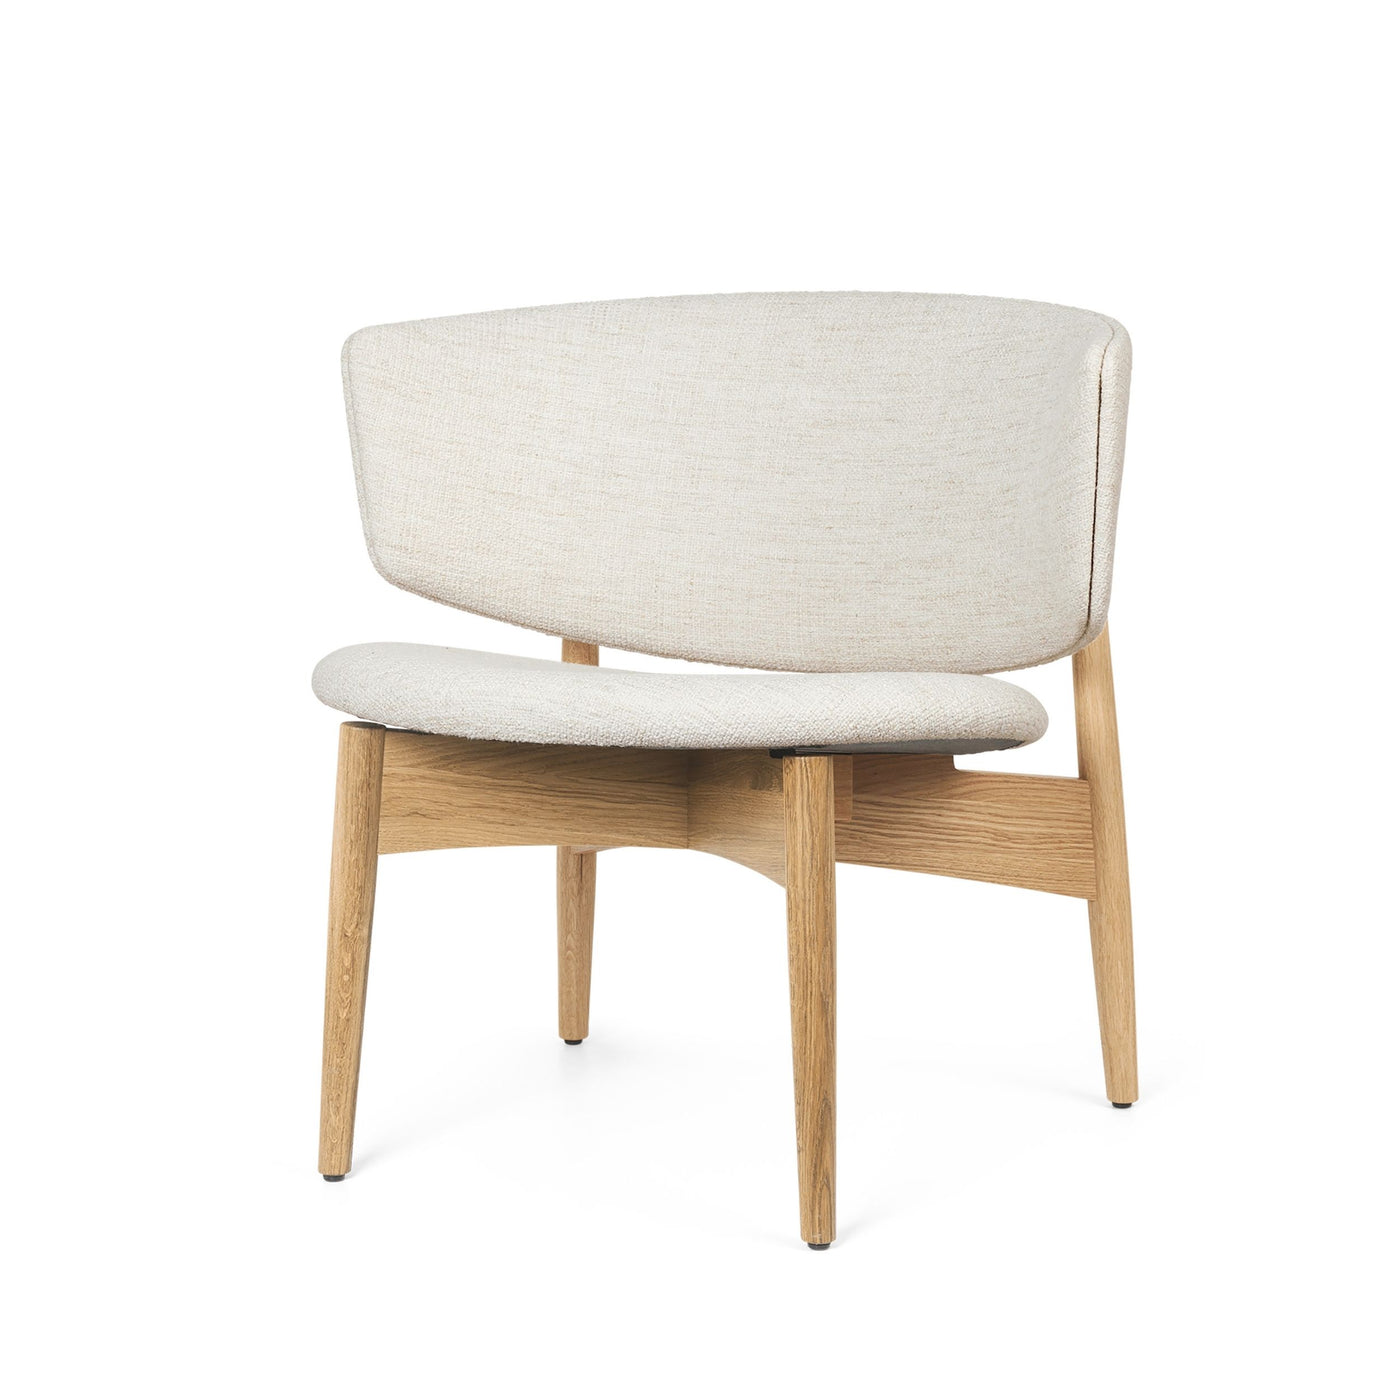 The Herman lounge chair is crafted from FSC™ Mix-certified wood and features a high-quality upholstery for added comfort. The low design features a generous base and a gently undulating backrest. Free UK delivery at Someday Designs #off-white-wool-boucle